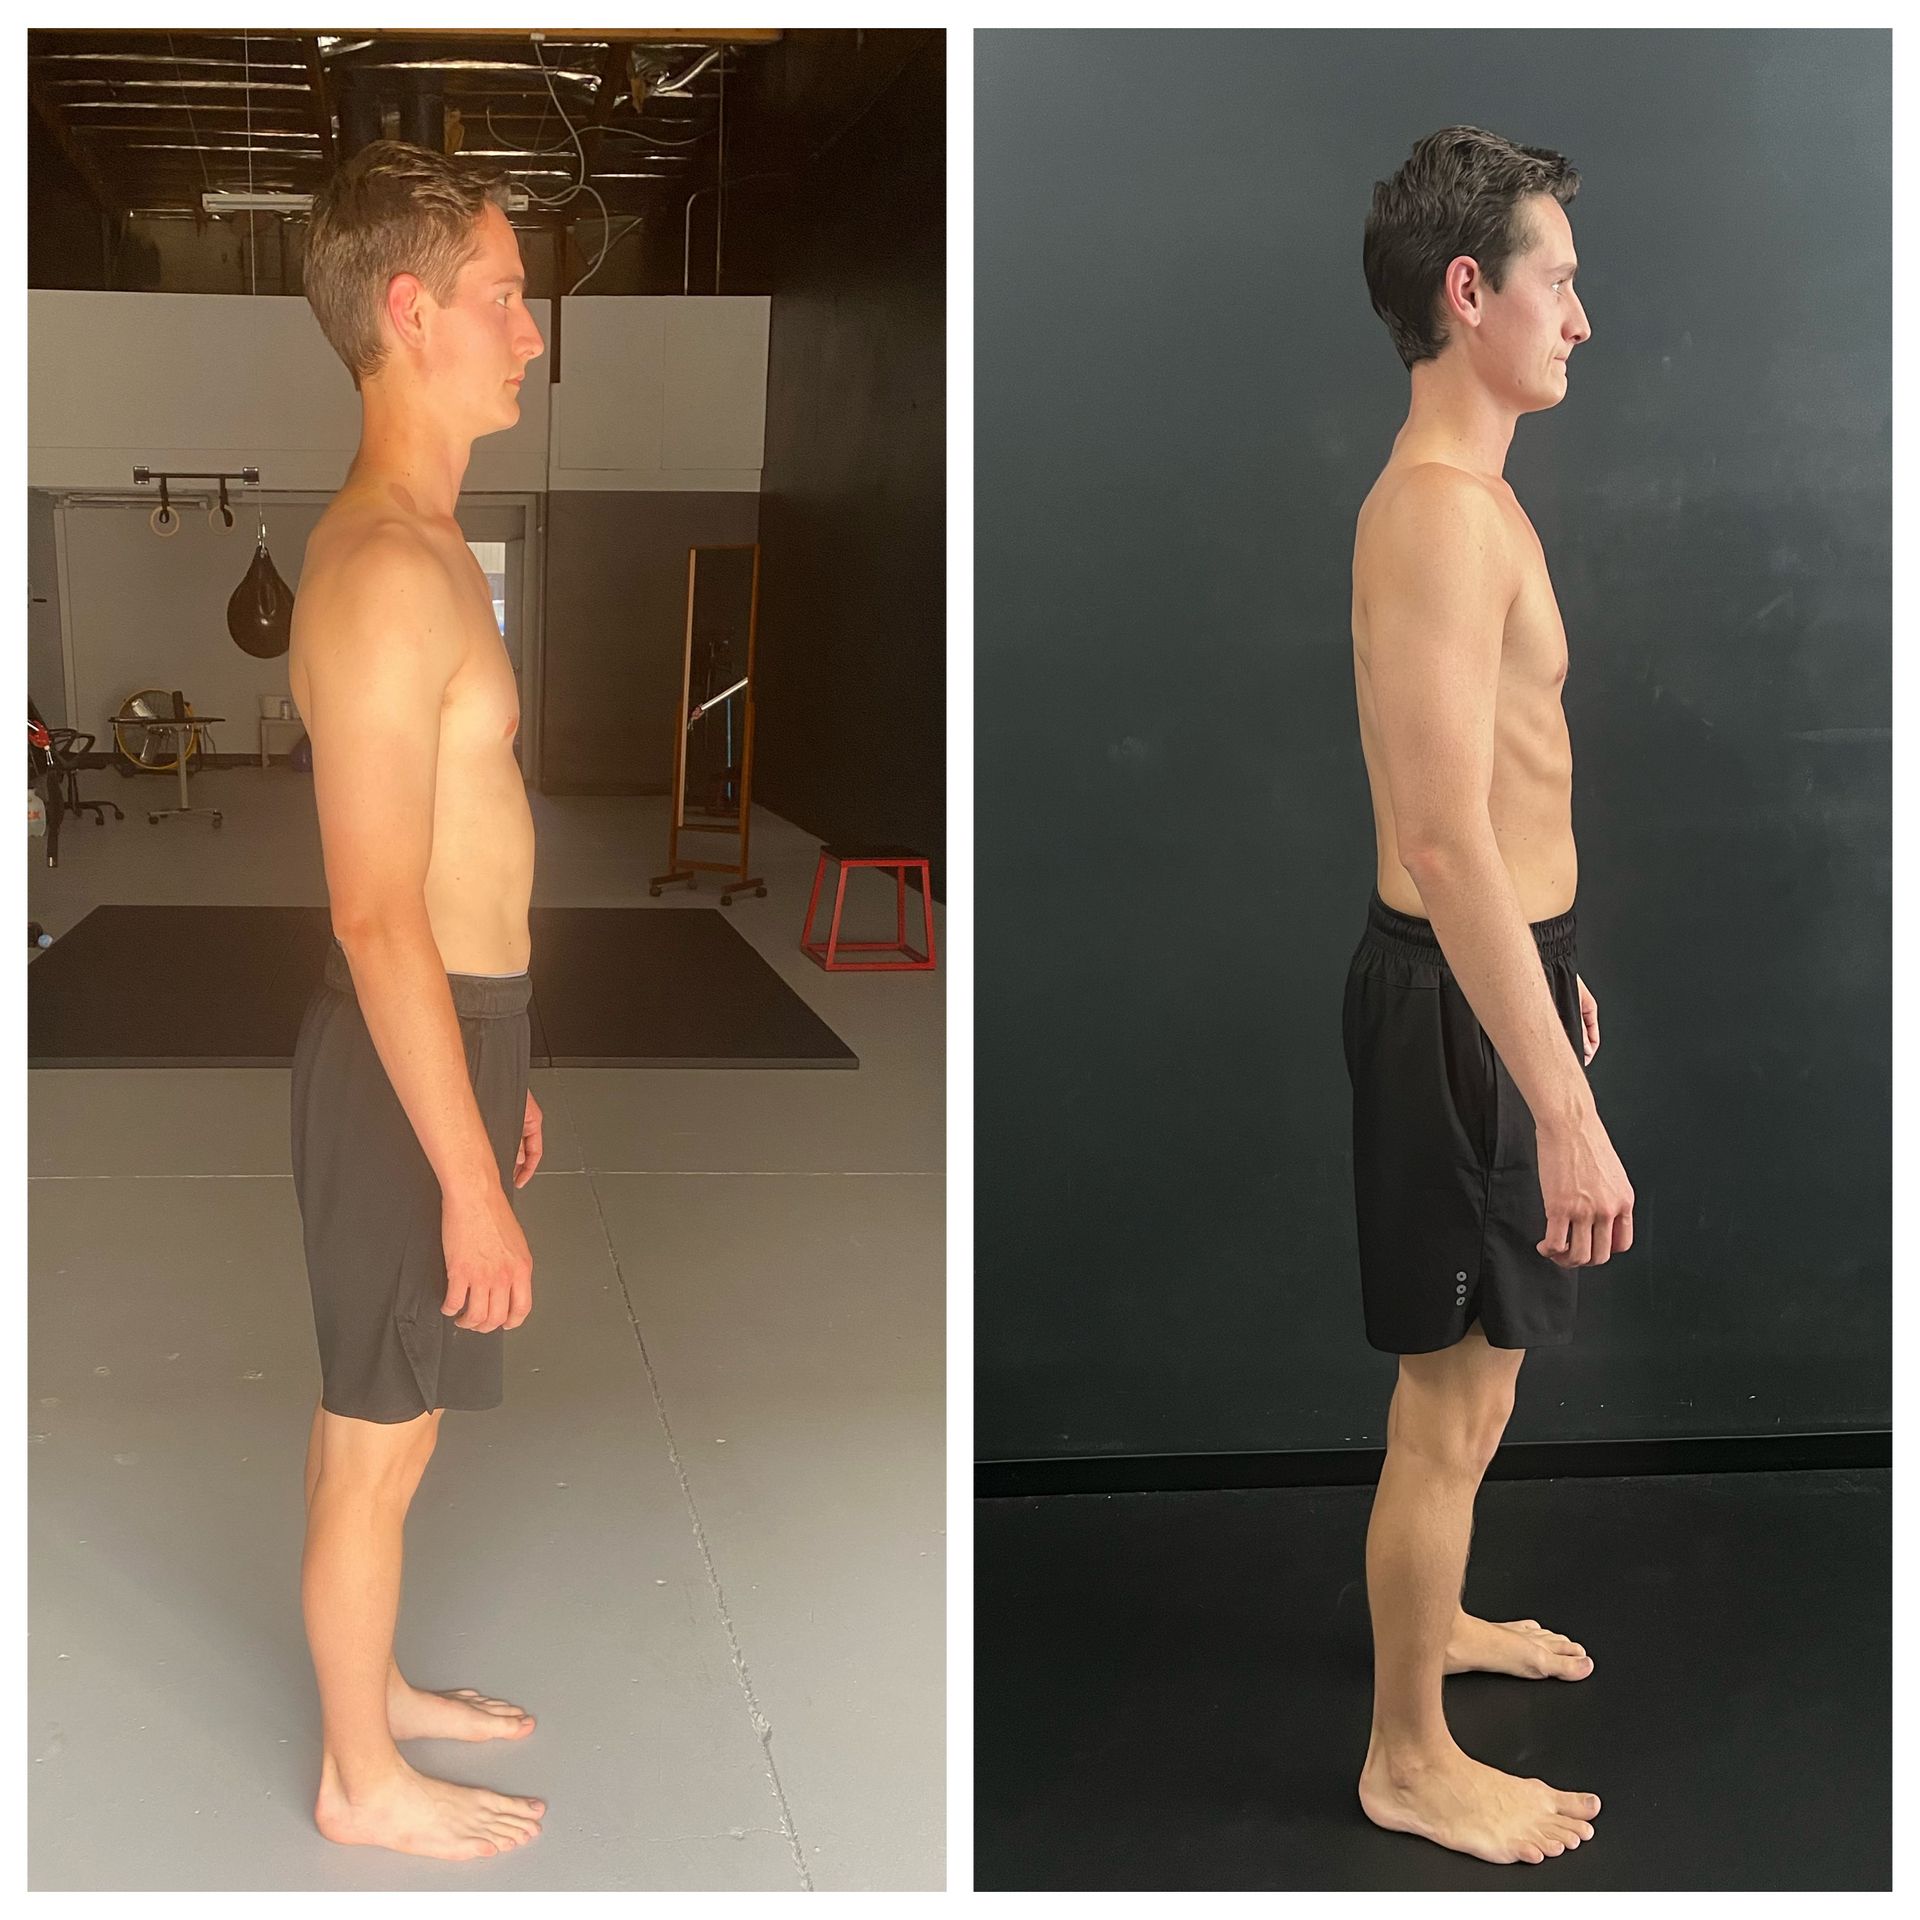 Two pictures of a shirtless man standing in a gym